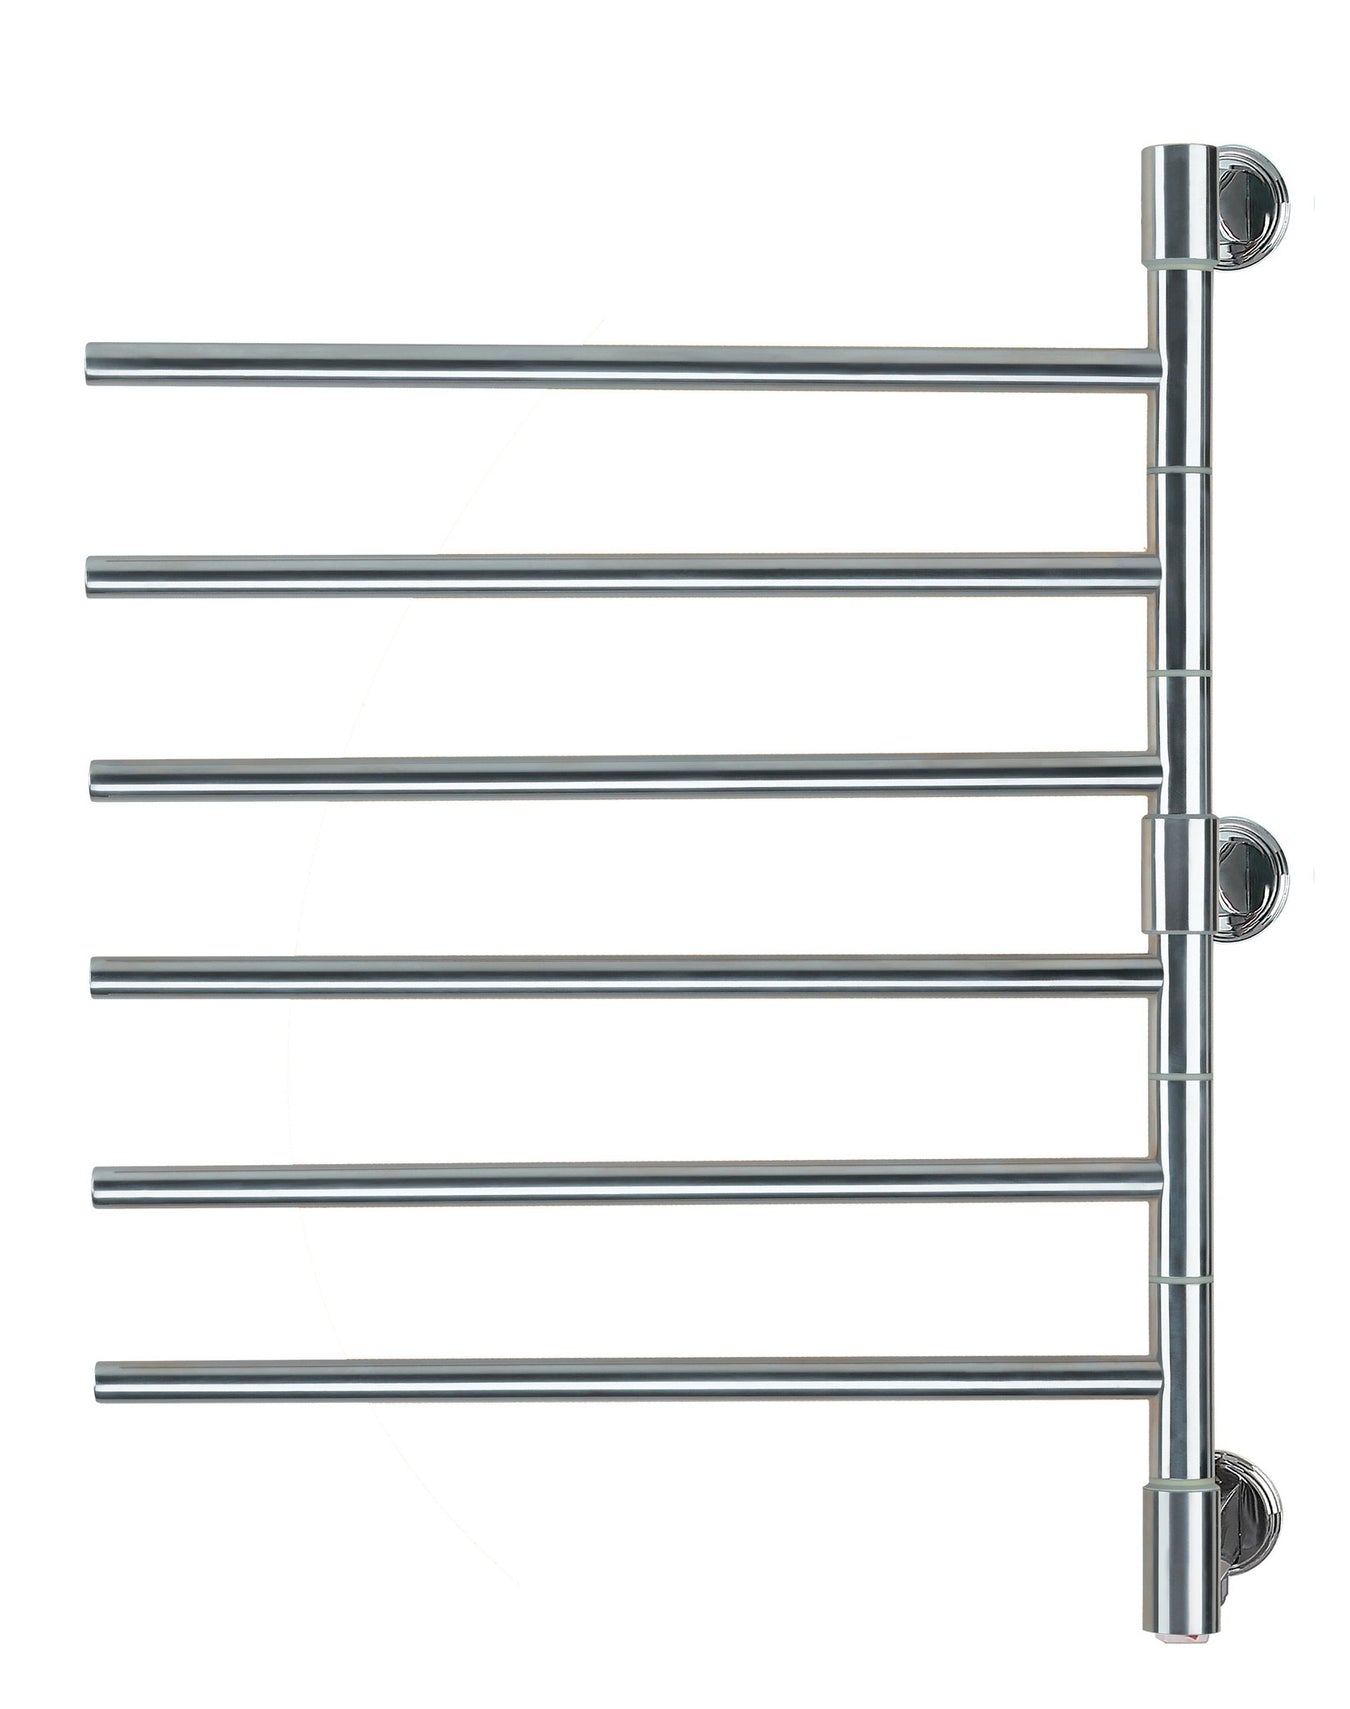 Amba Products Swivel Collection Jack D006 Towel Warmers